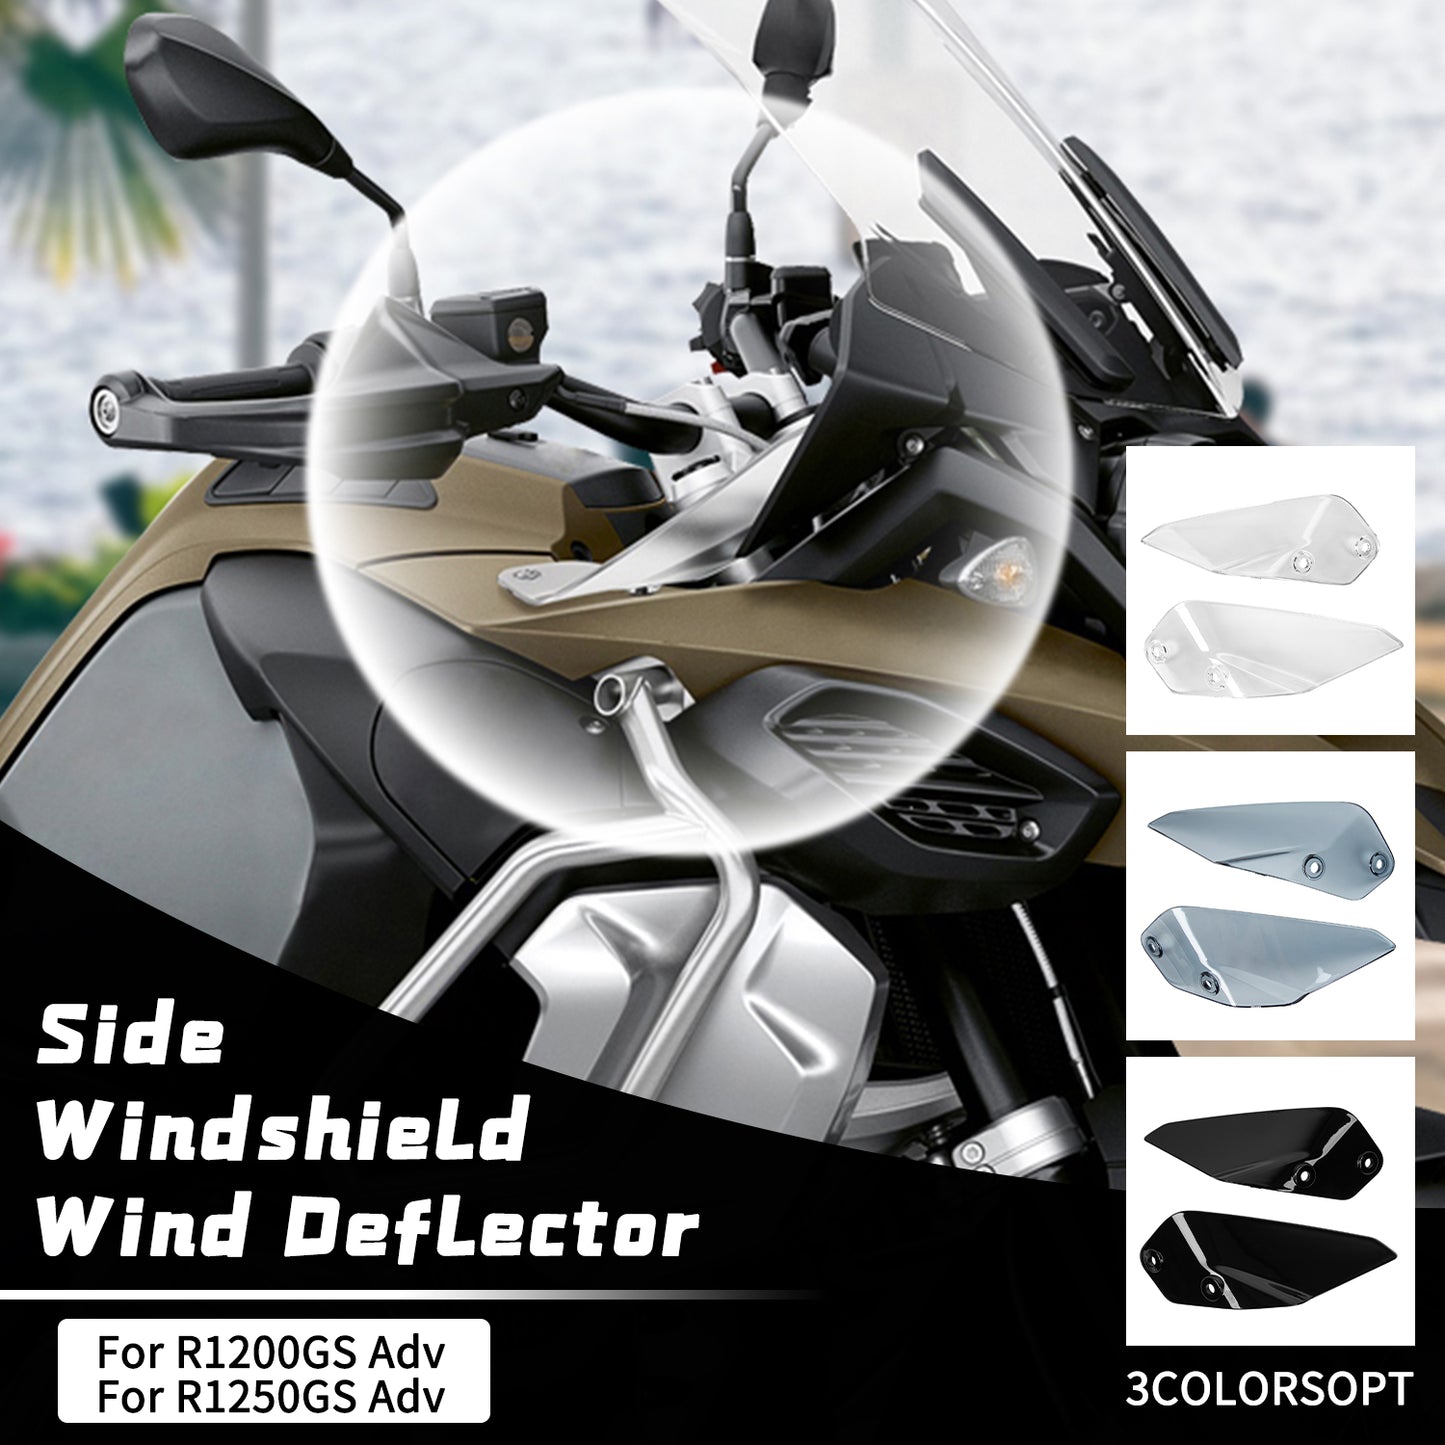 R1250GS Adventure Windshield Windscreen Side Panel Deflector Airflow Hand Shield Protector For BMW R 1200 GS ADV 2014-2020 R1250GS ADV 2019-2022